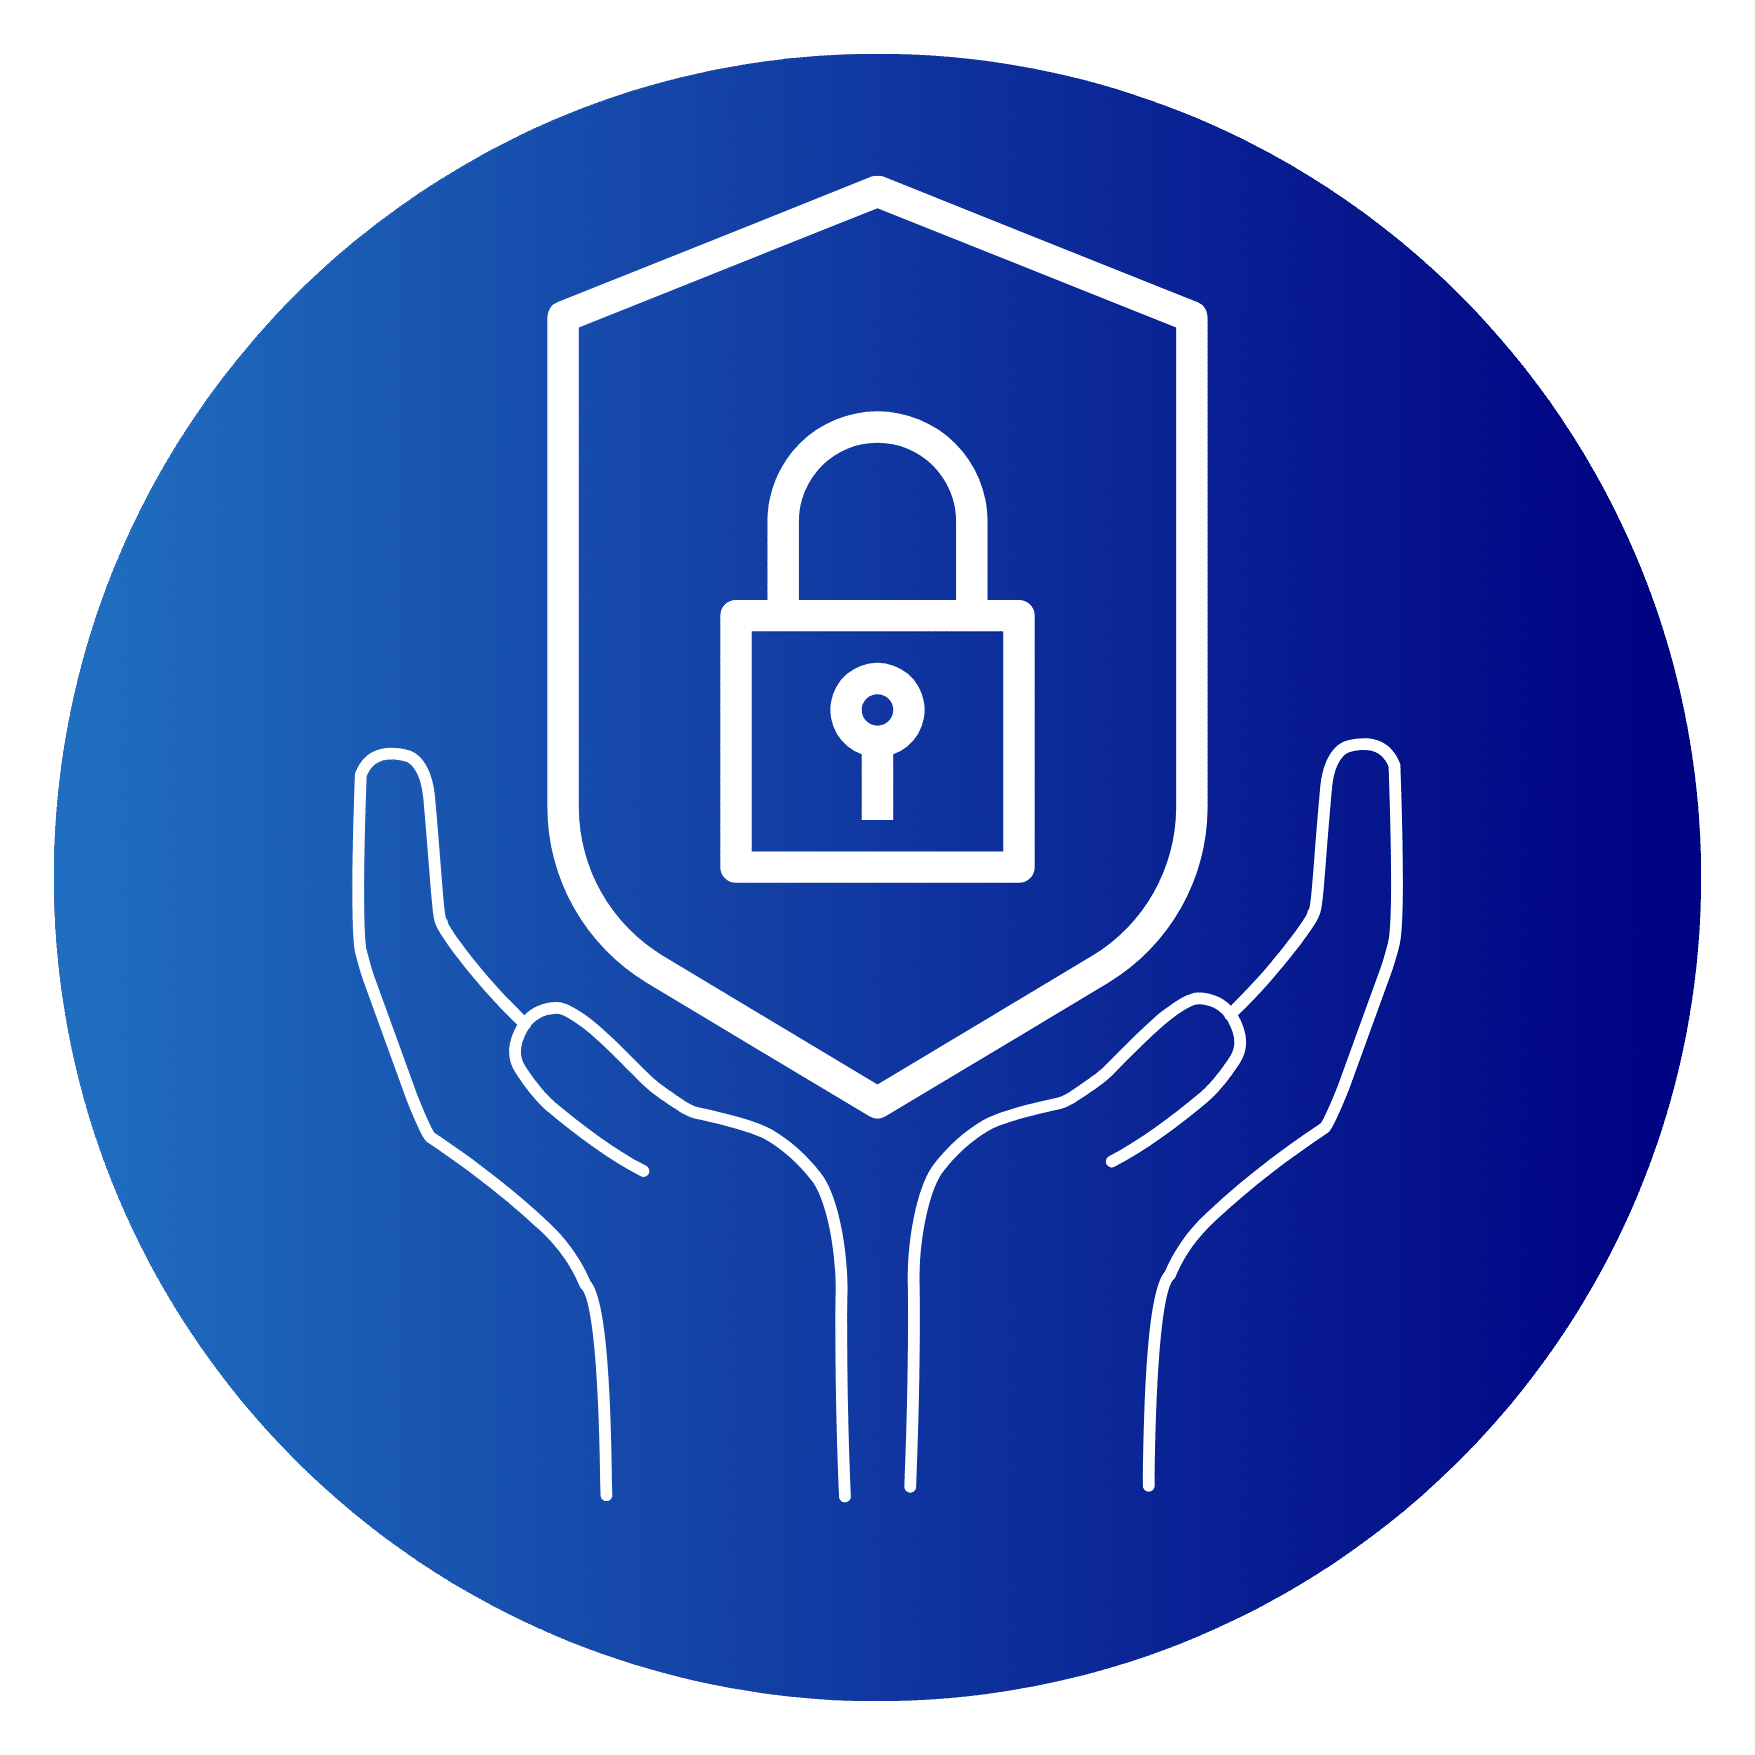 Elevate your cyber security with SOPHOs